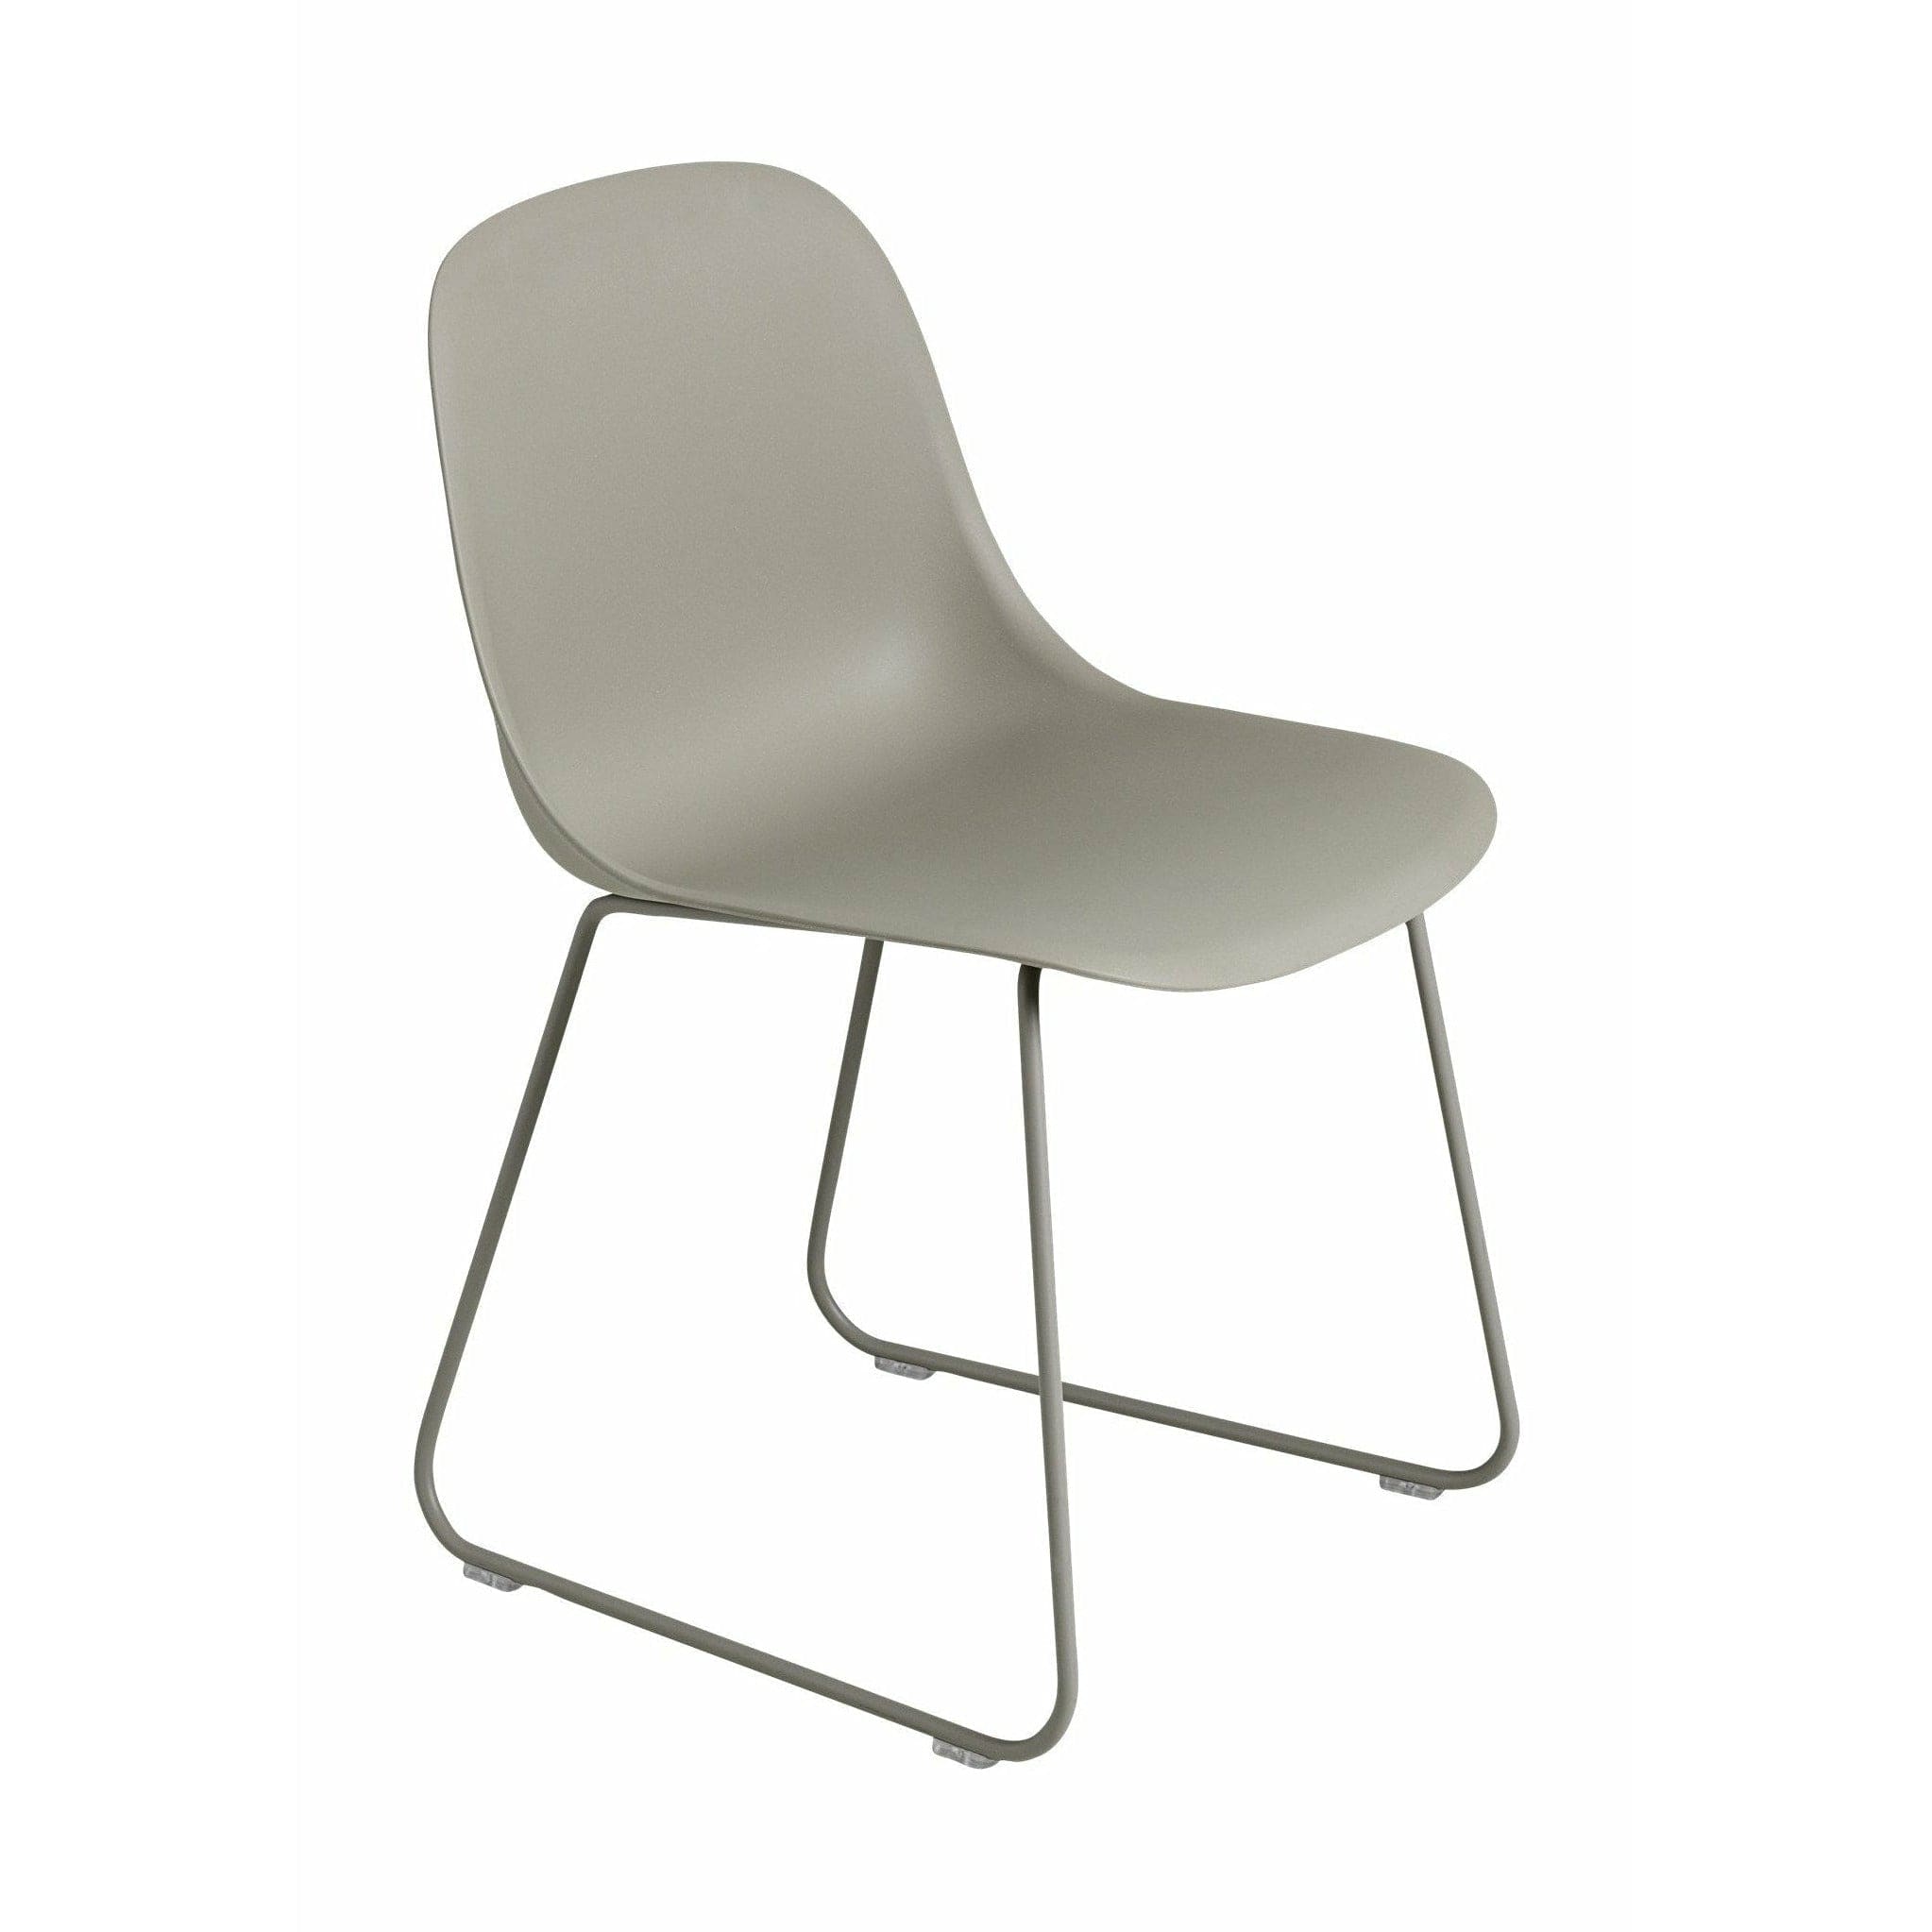 Muuto Fiber Side Chair Made Of Recycled Plastic Sled Base, Grey/Grey